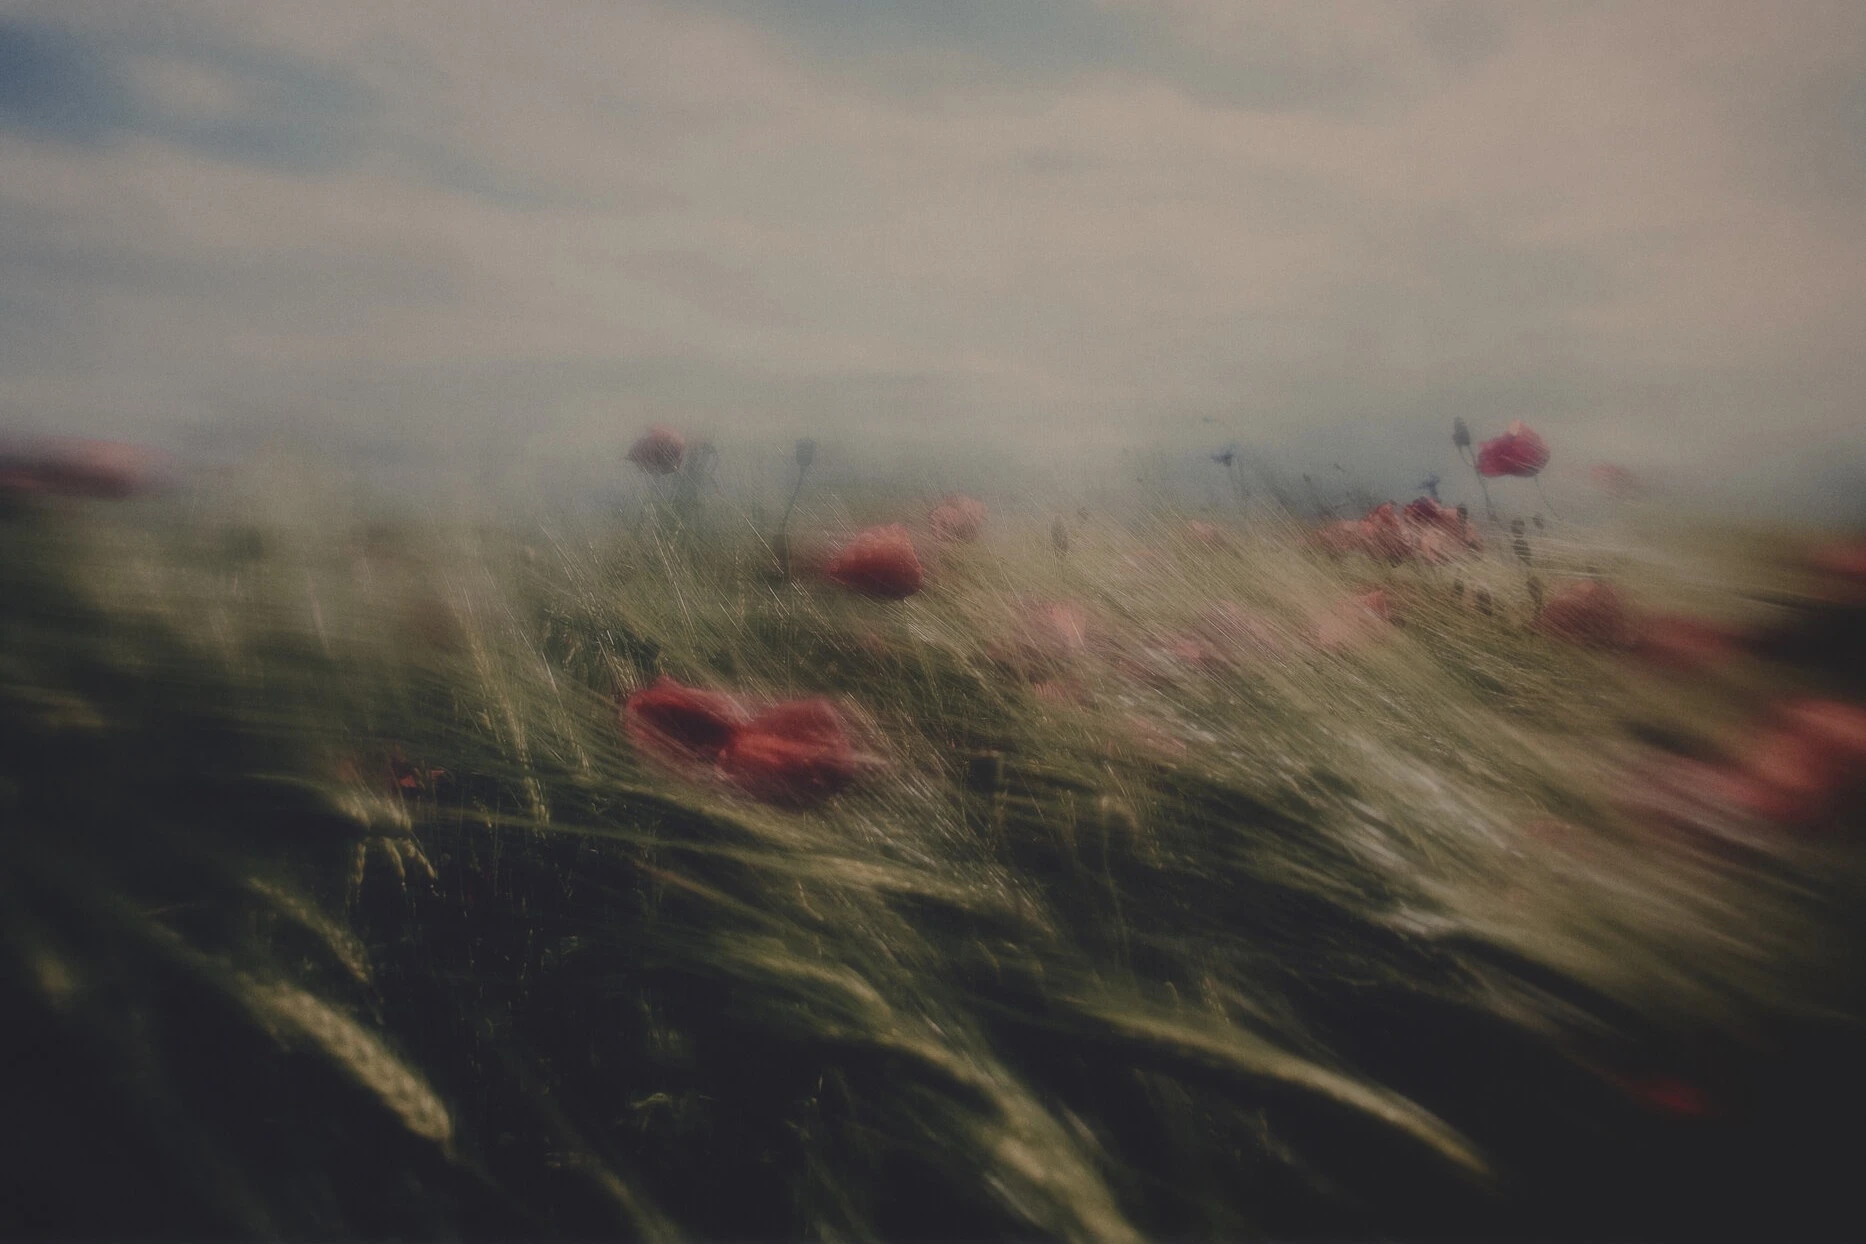 blurry photography of a poppy field.